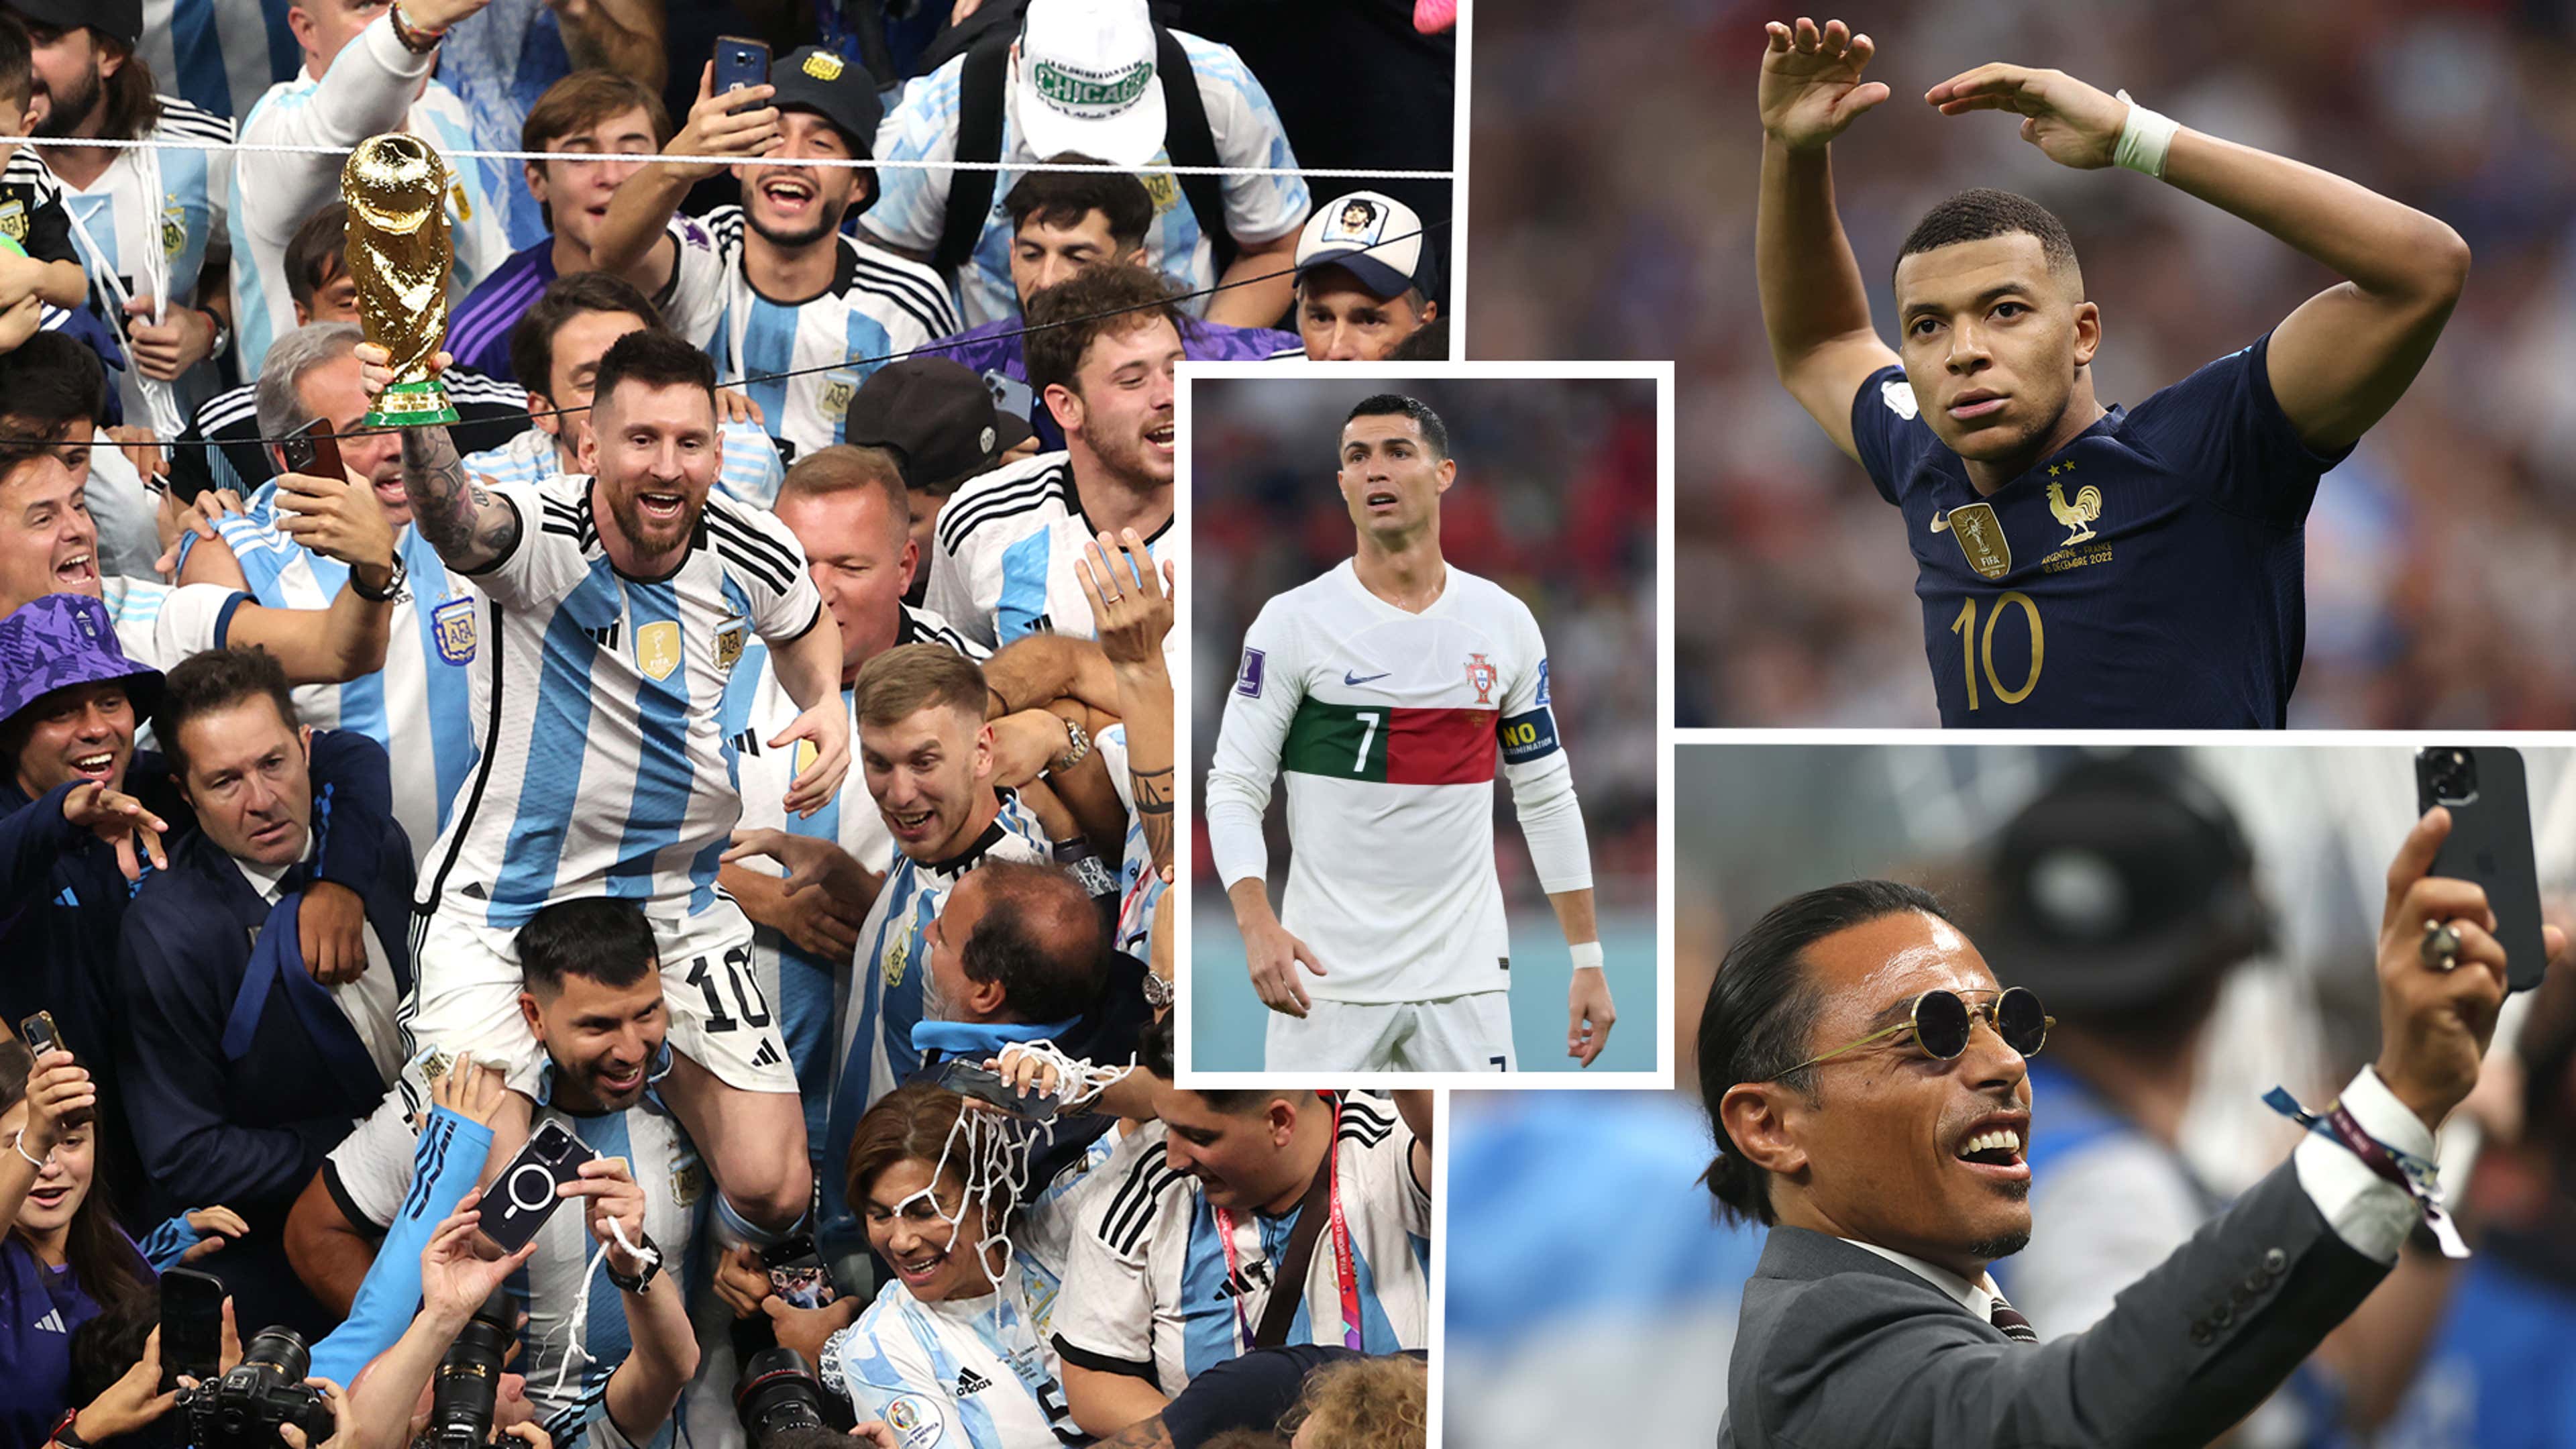 Inside incredible gift bag given to fans at World Cup stadiums